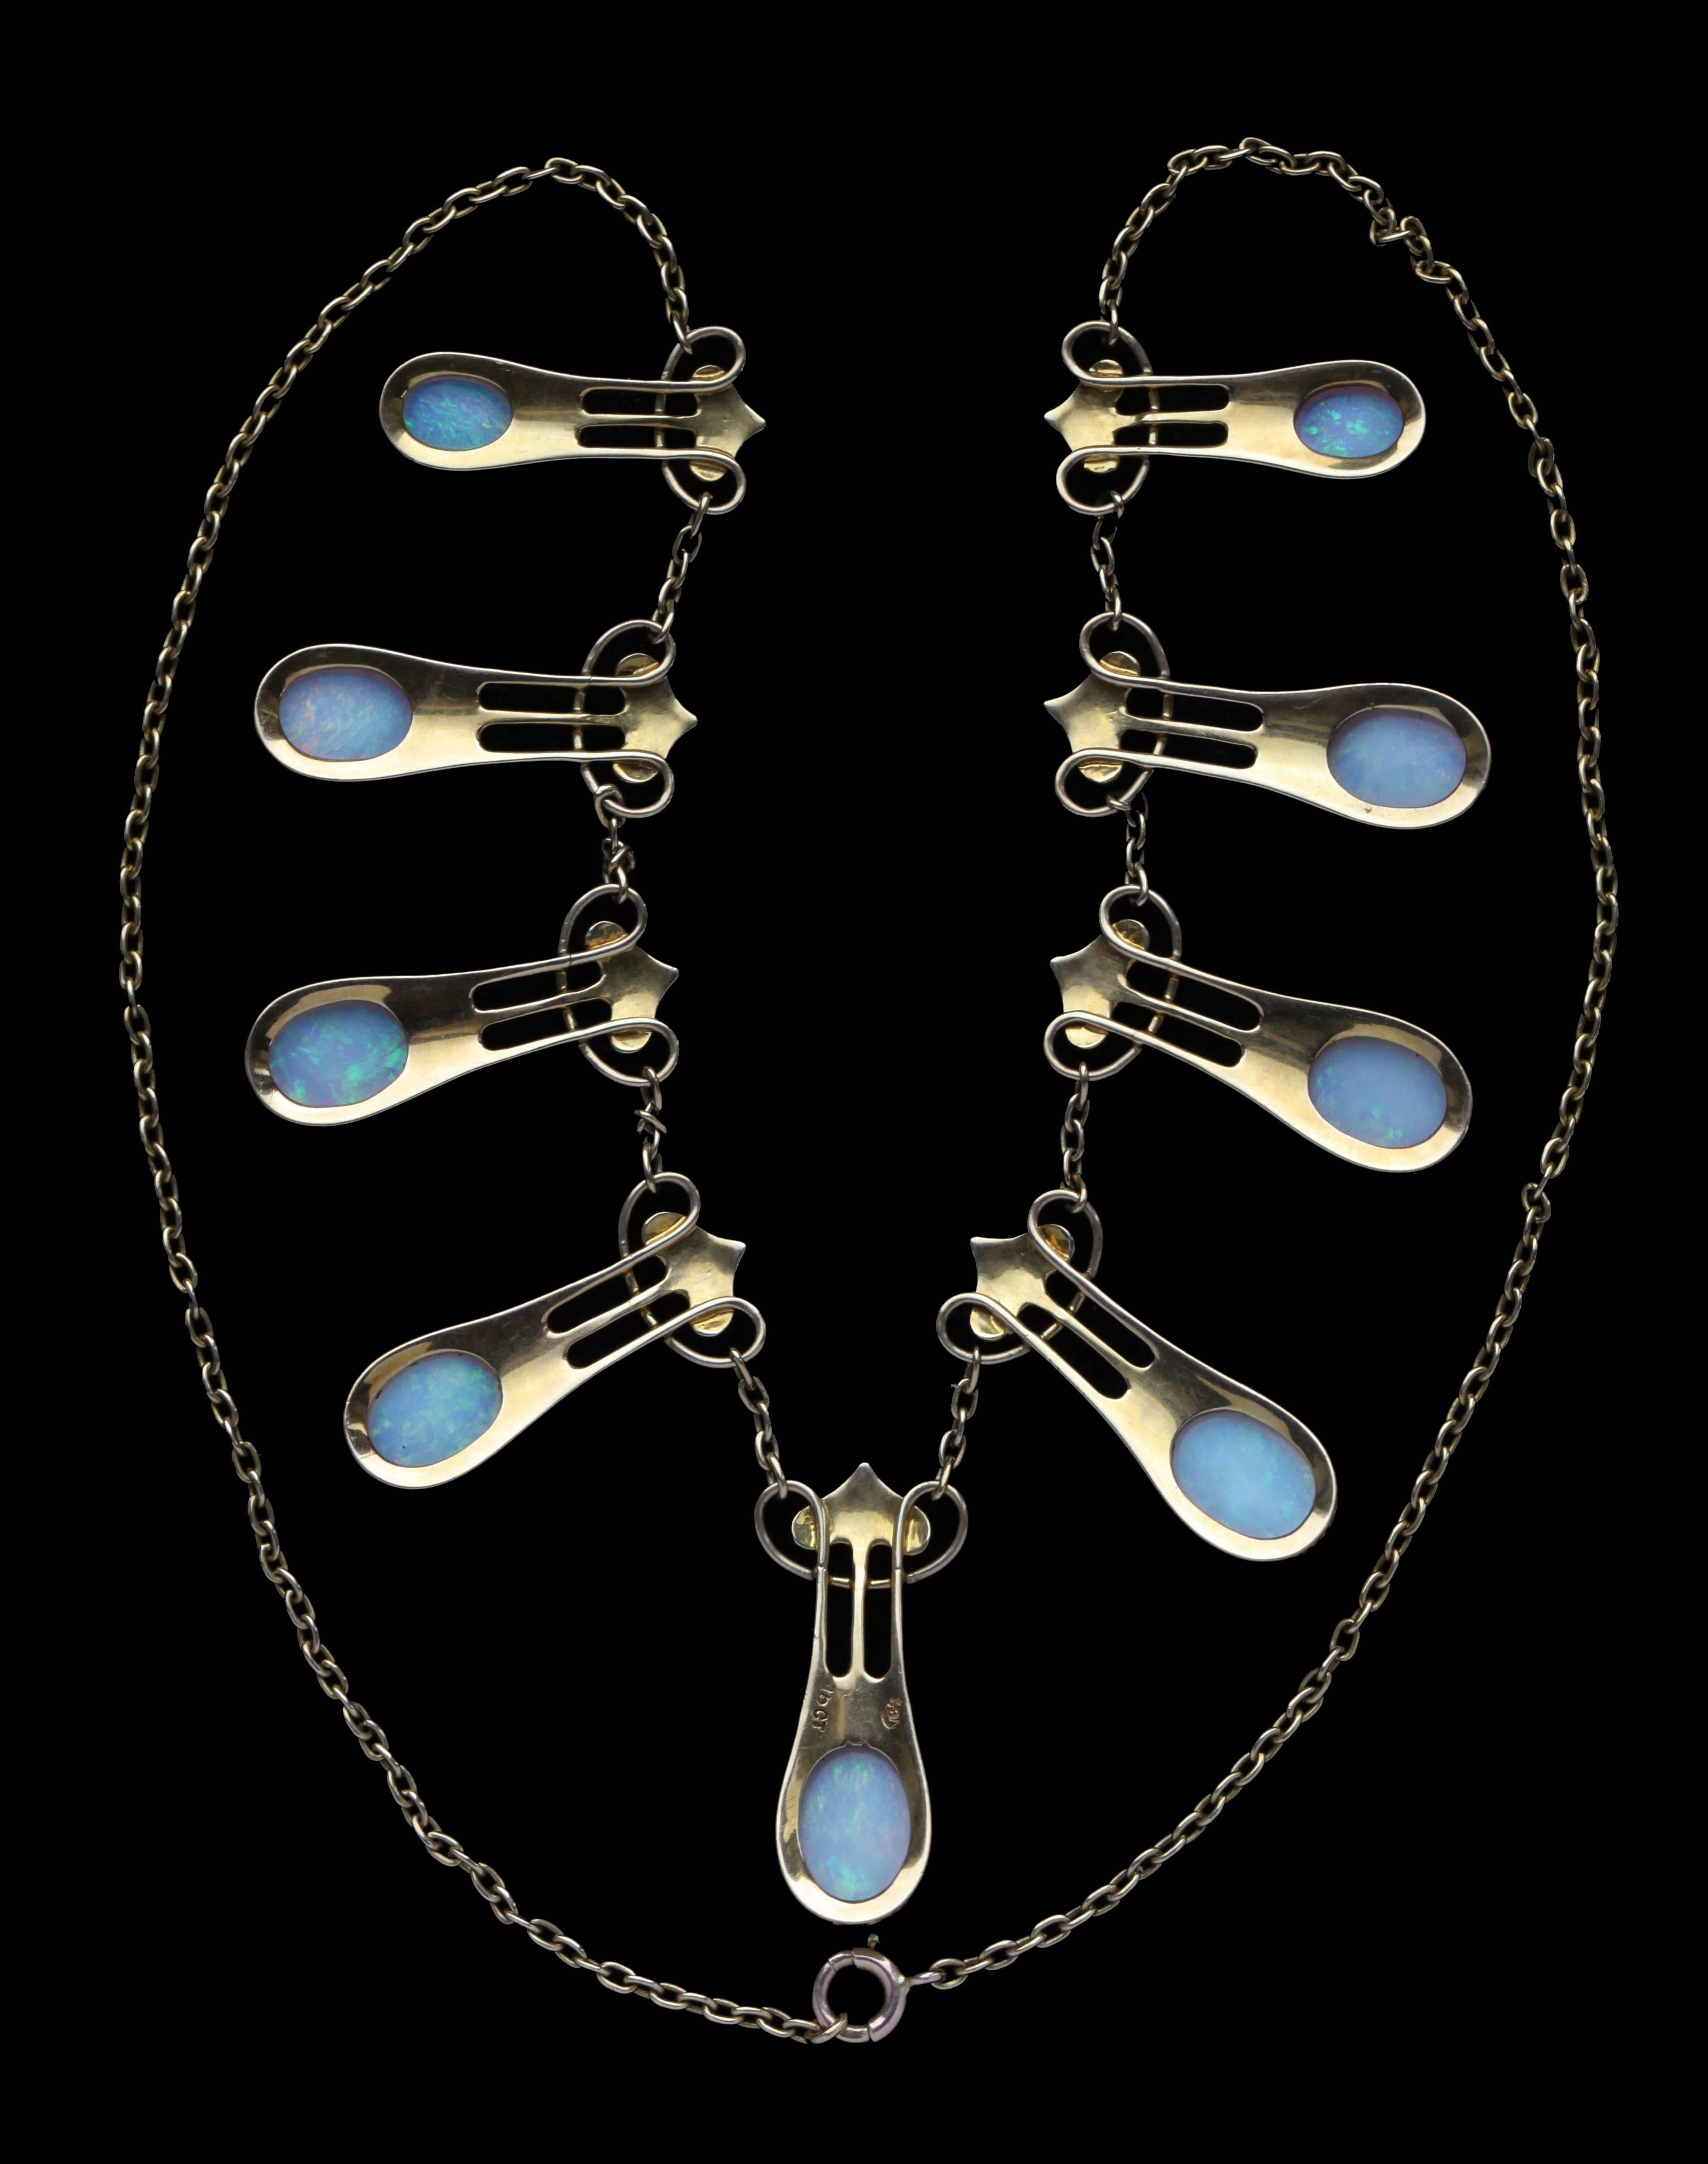 Beautiful Art Nouveau gold necklace with finely matched opals.